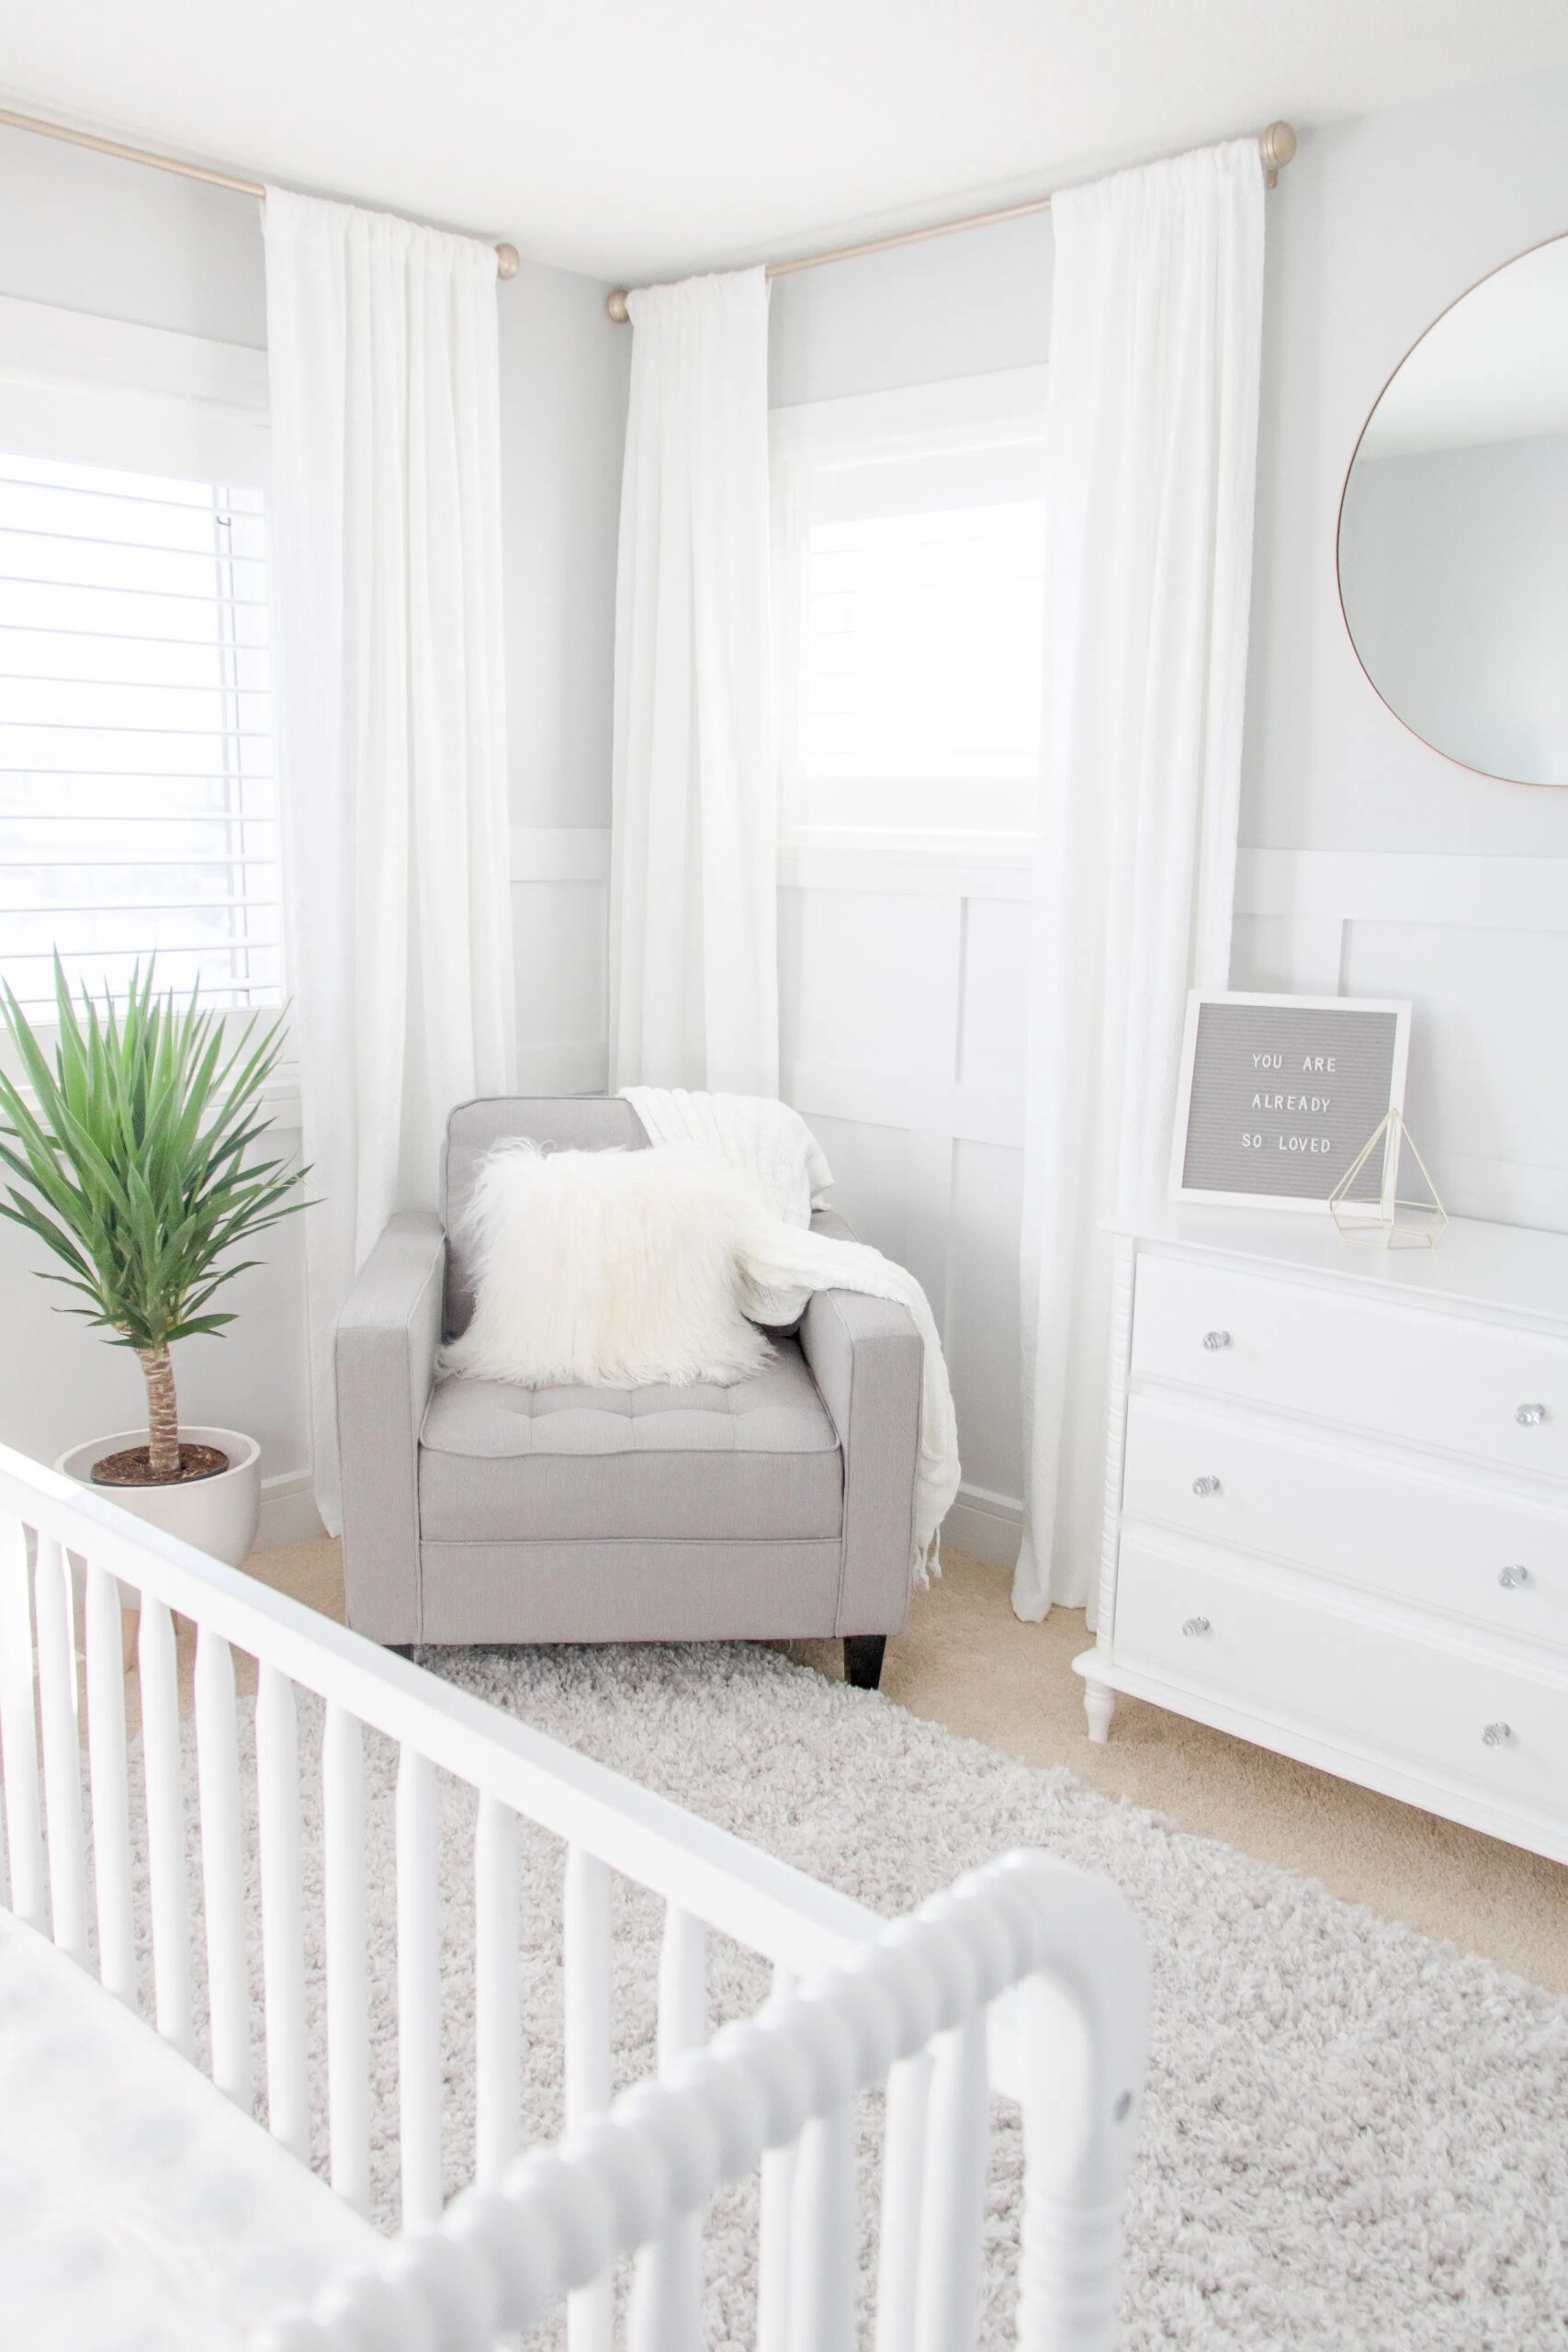 Why White Cribs Are a Timeless Choice for
Baby’s Room